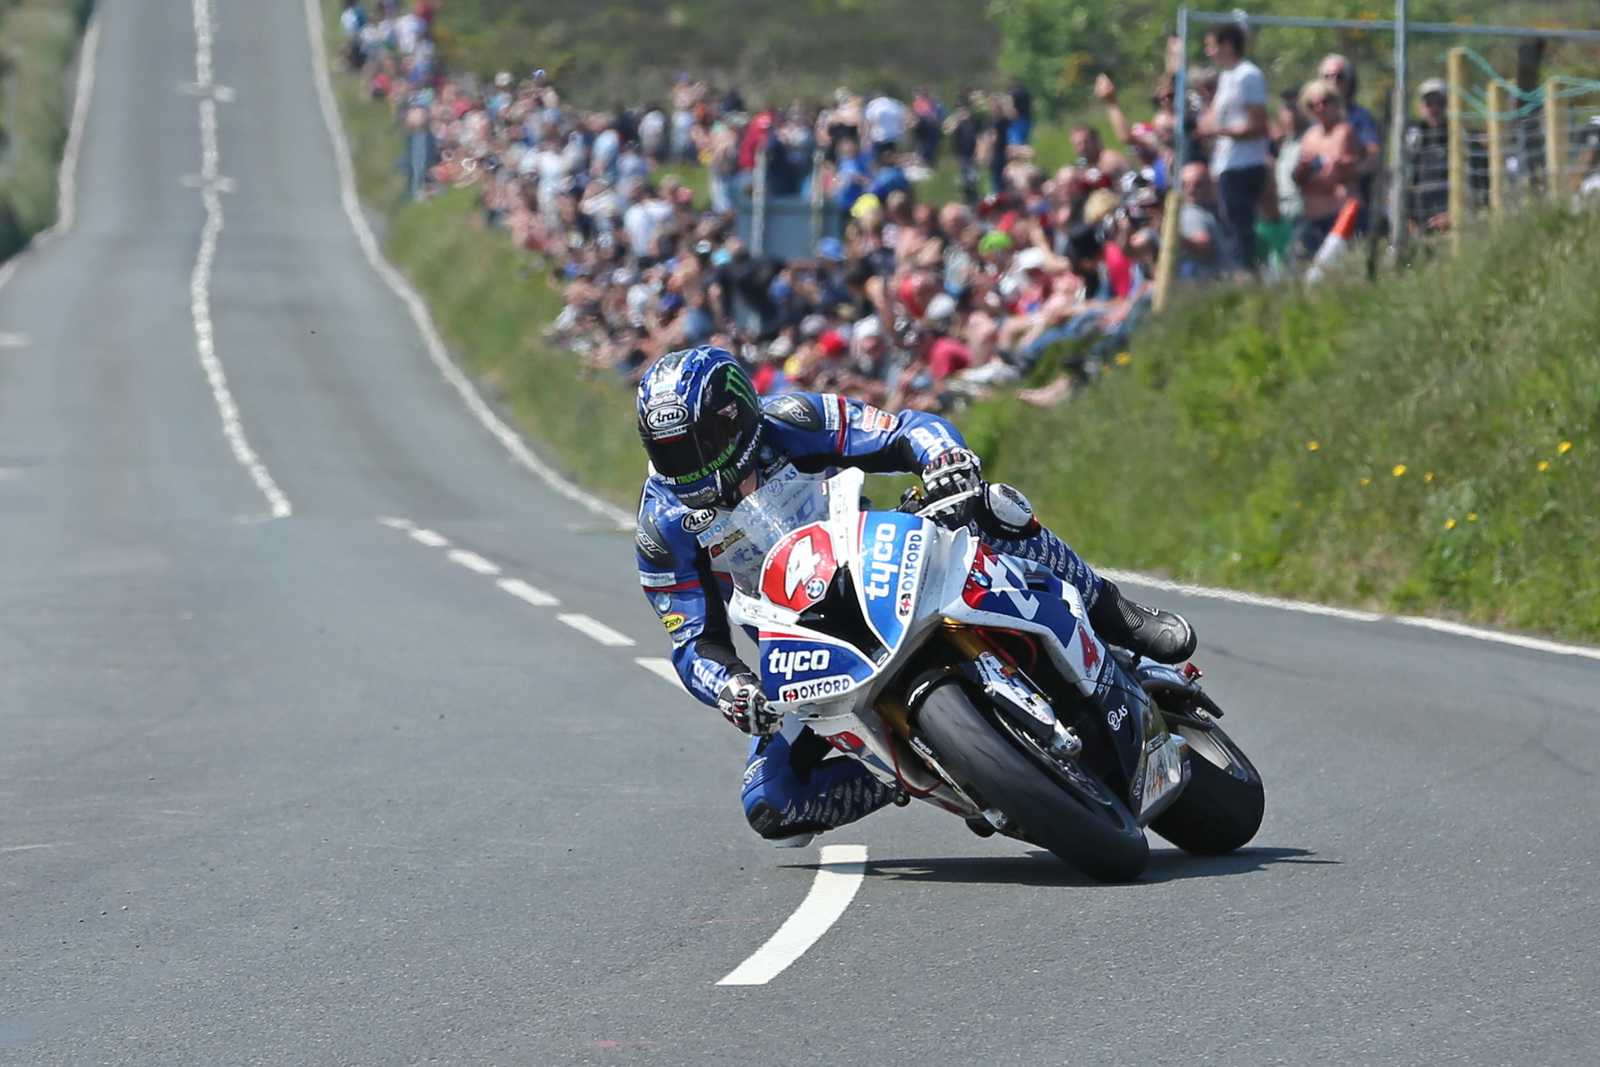 Isle Of Man TT Race Pictures And Wallpapers - MAXIPX